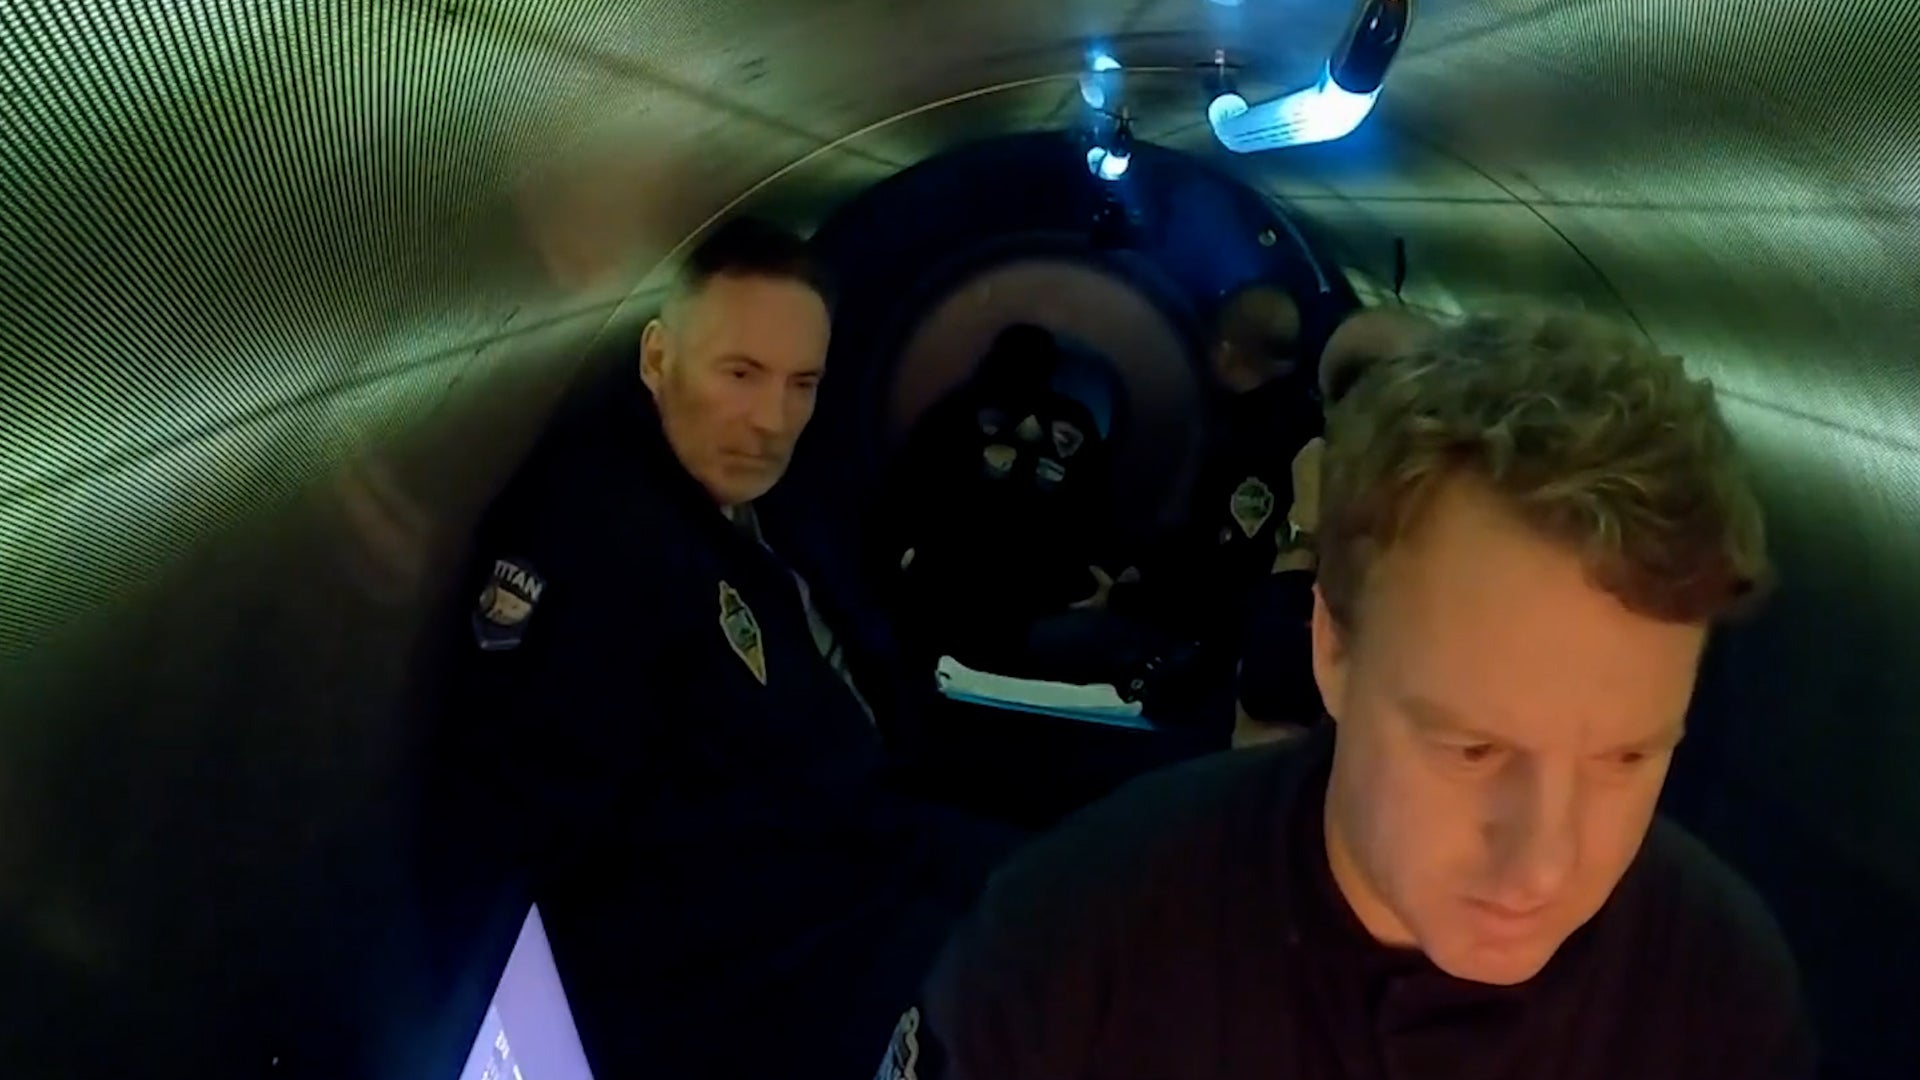 Inside the submersible